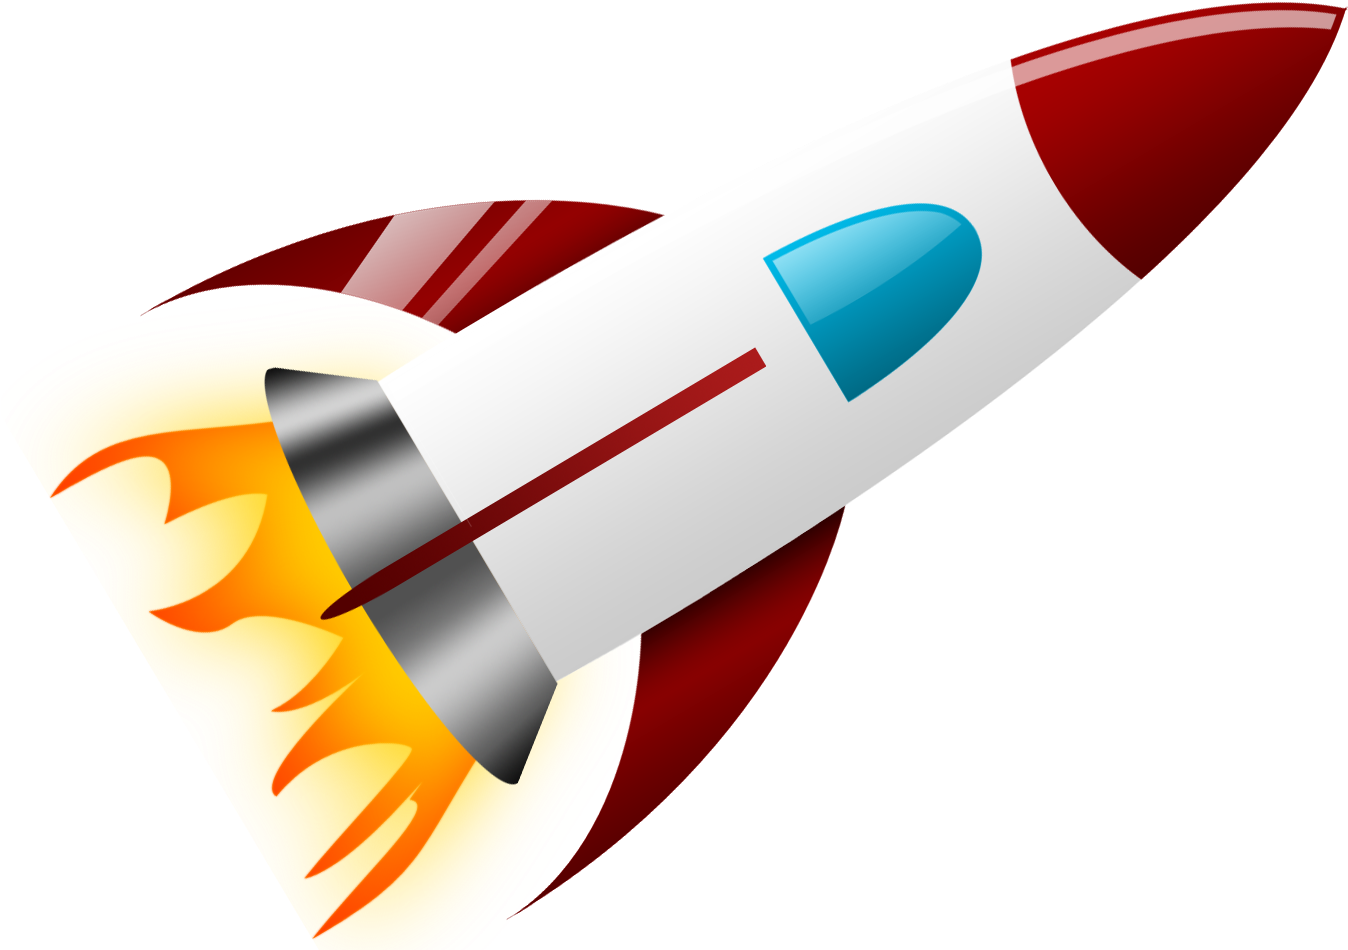 This High Quality Free Png Image Without Any Background - Rocket (1366x968)